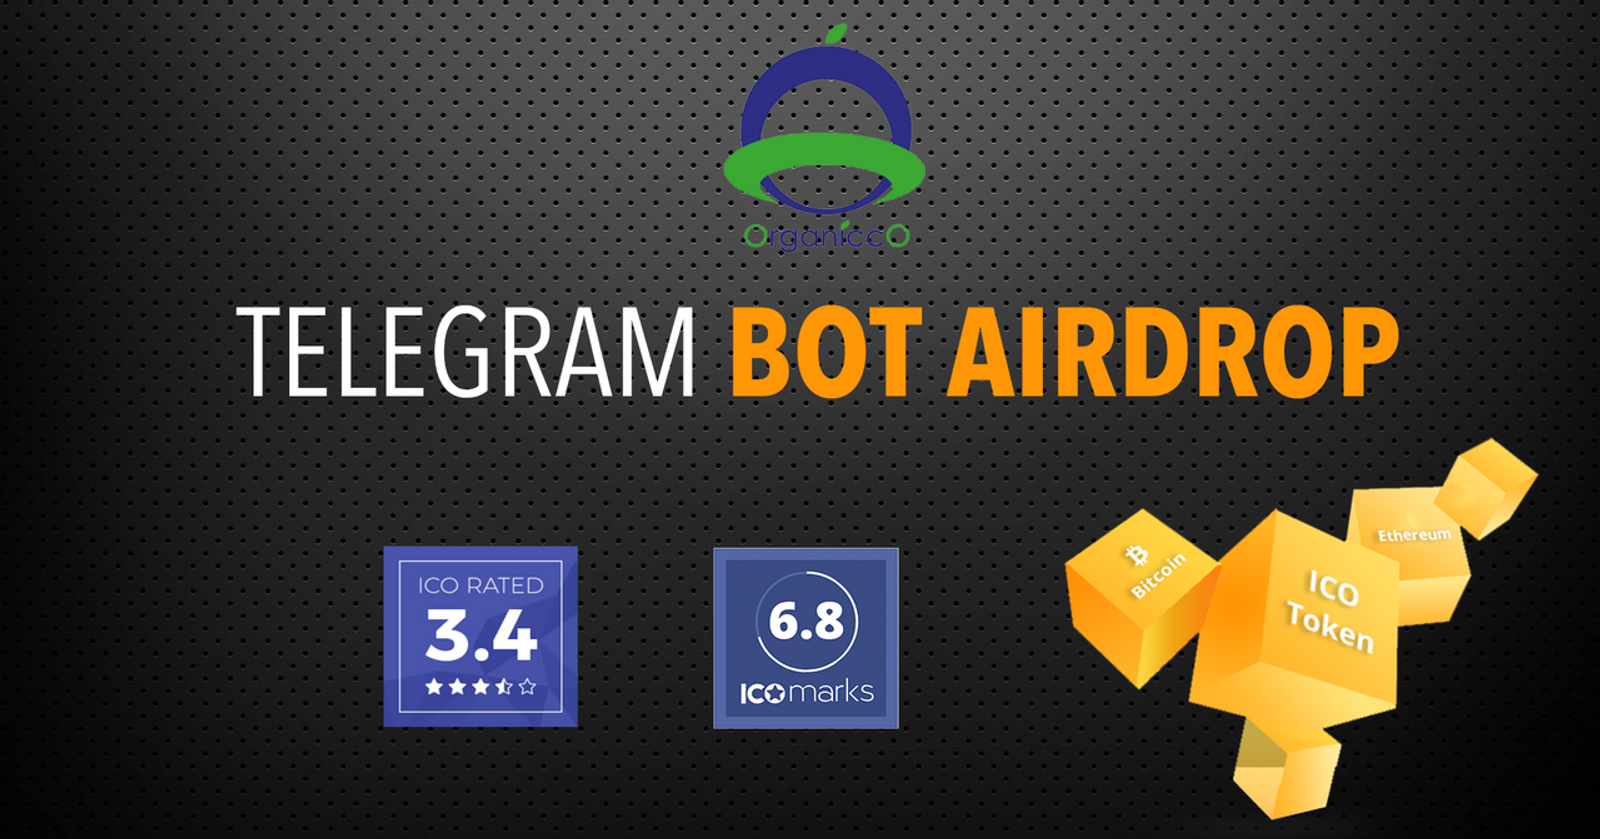 Telegram Airdrops » Find all airdrops & bounties for Telegram users!